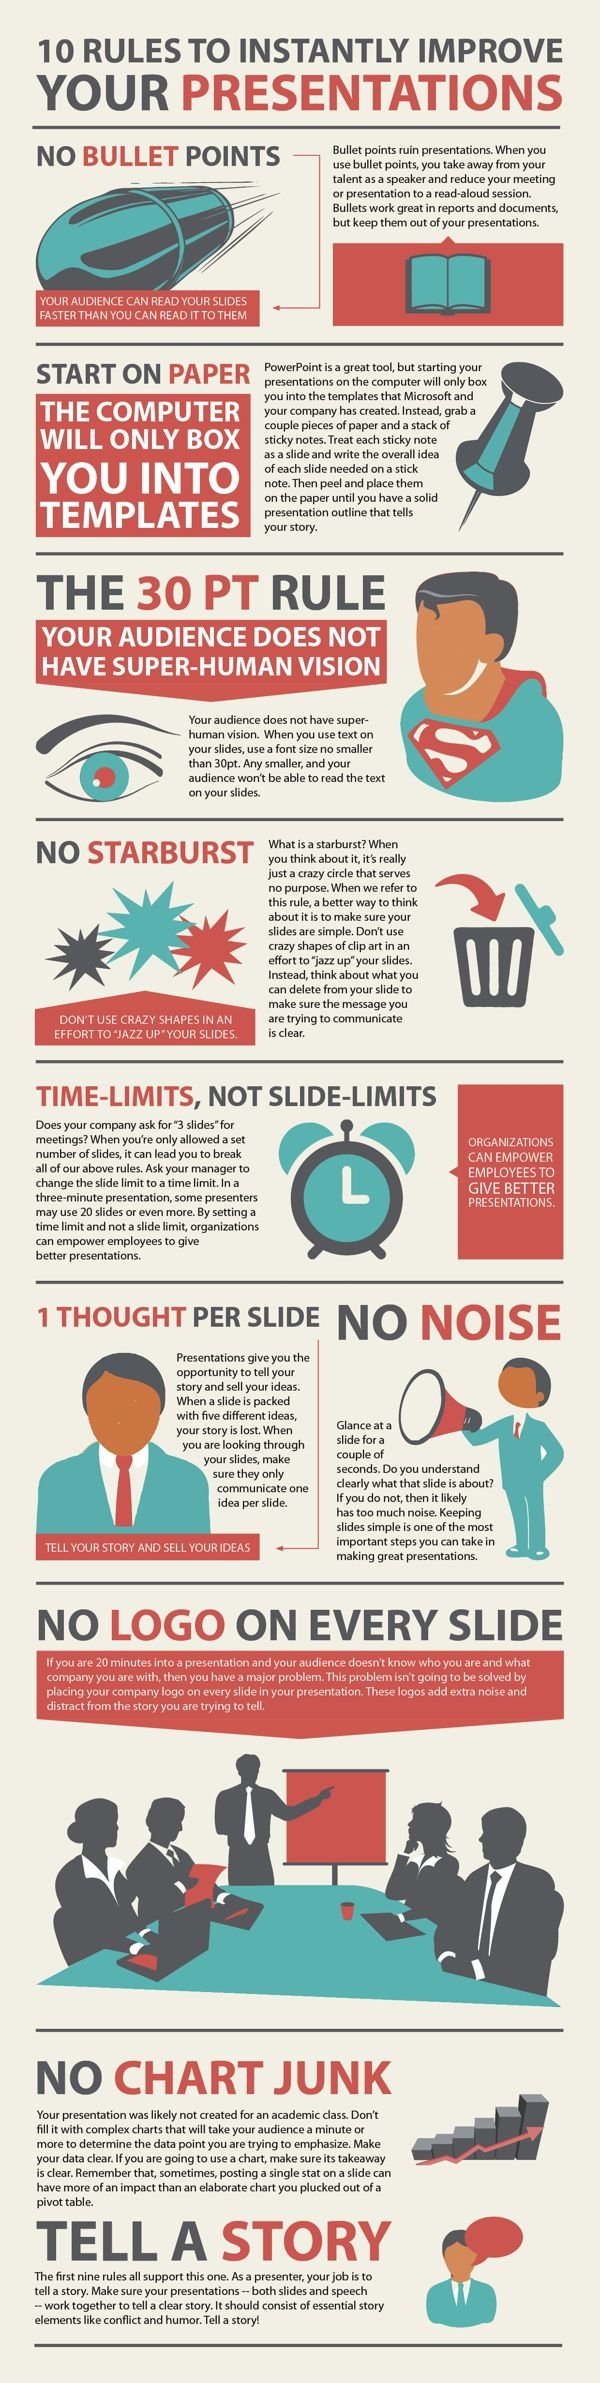 10 Rules To Improve Your Presentations